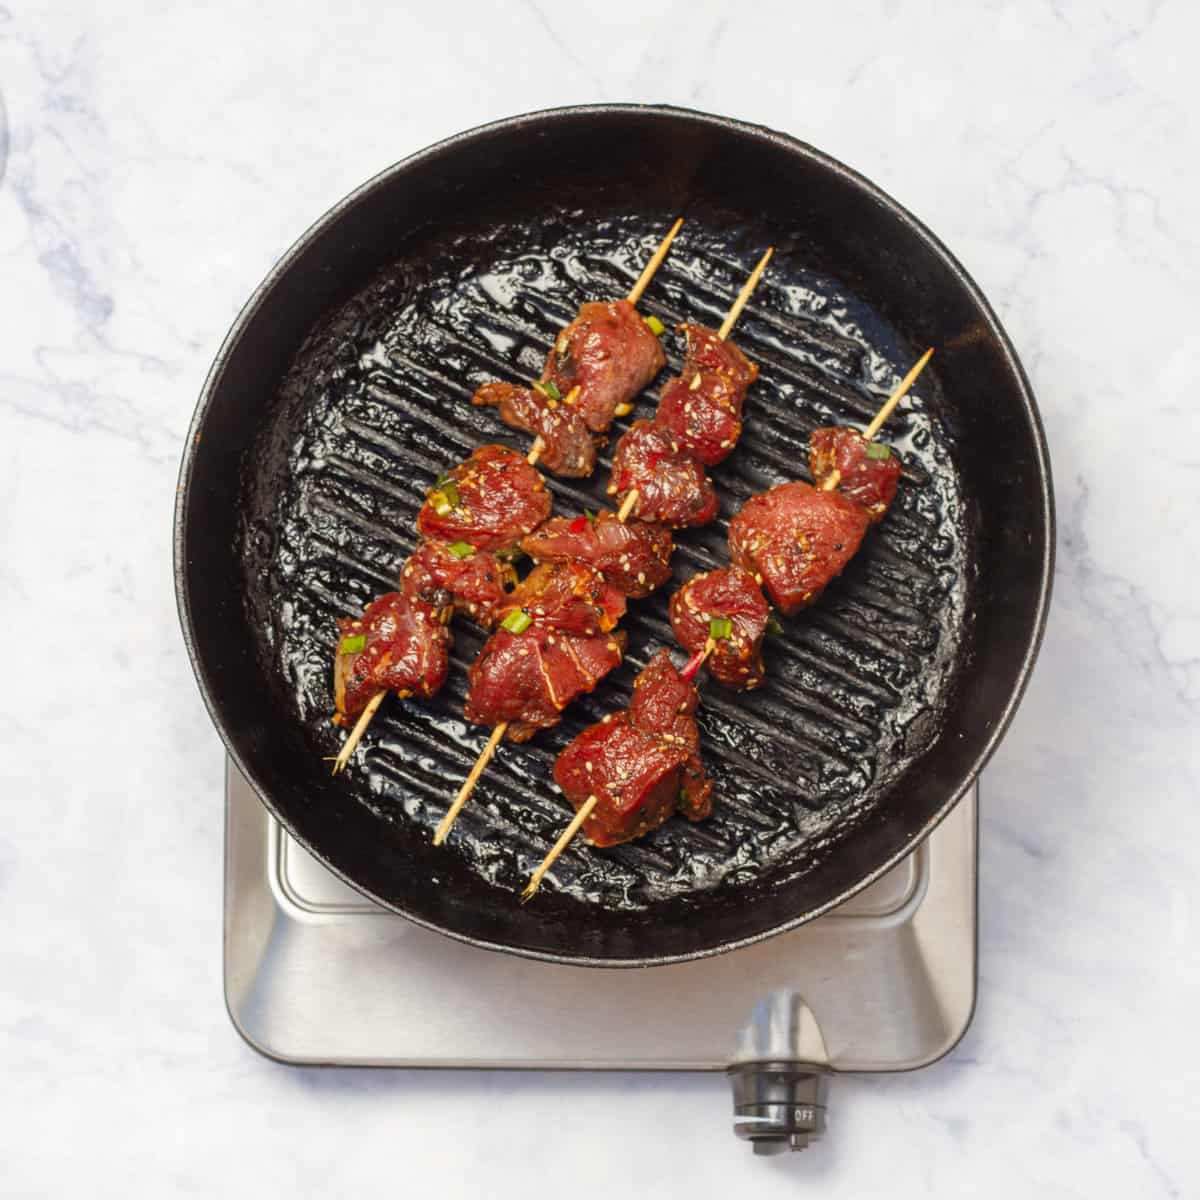 marinated beef cubes thread onto skewers and placed on fry pan